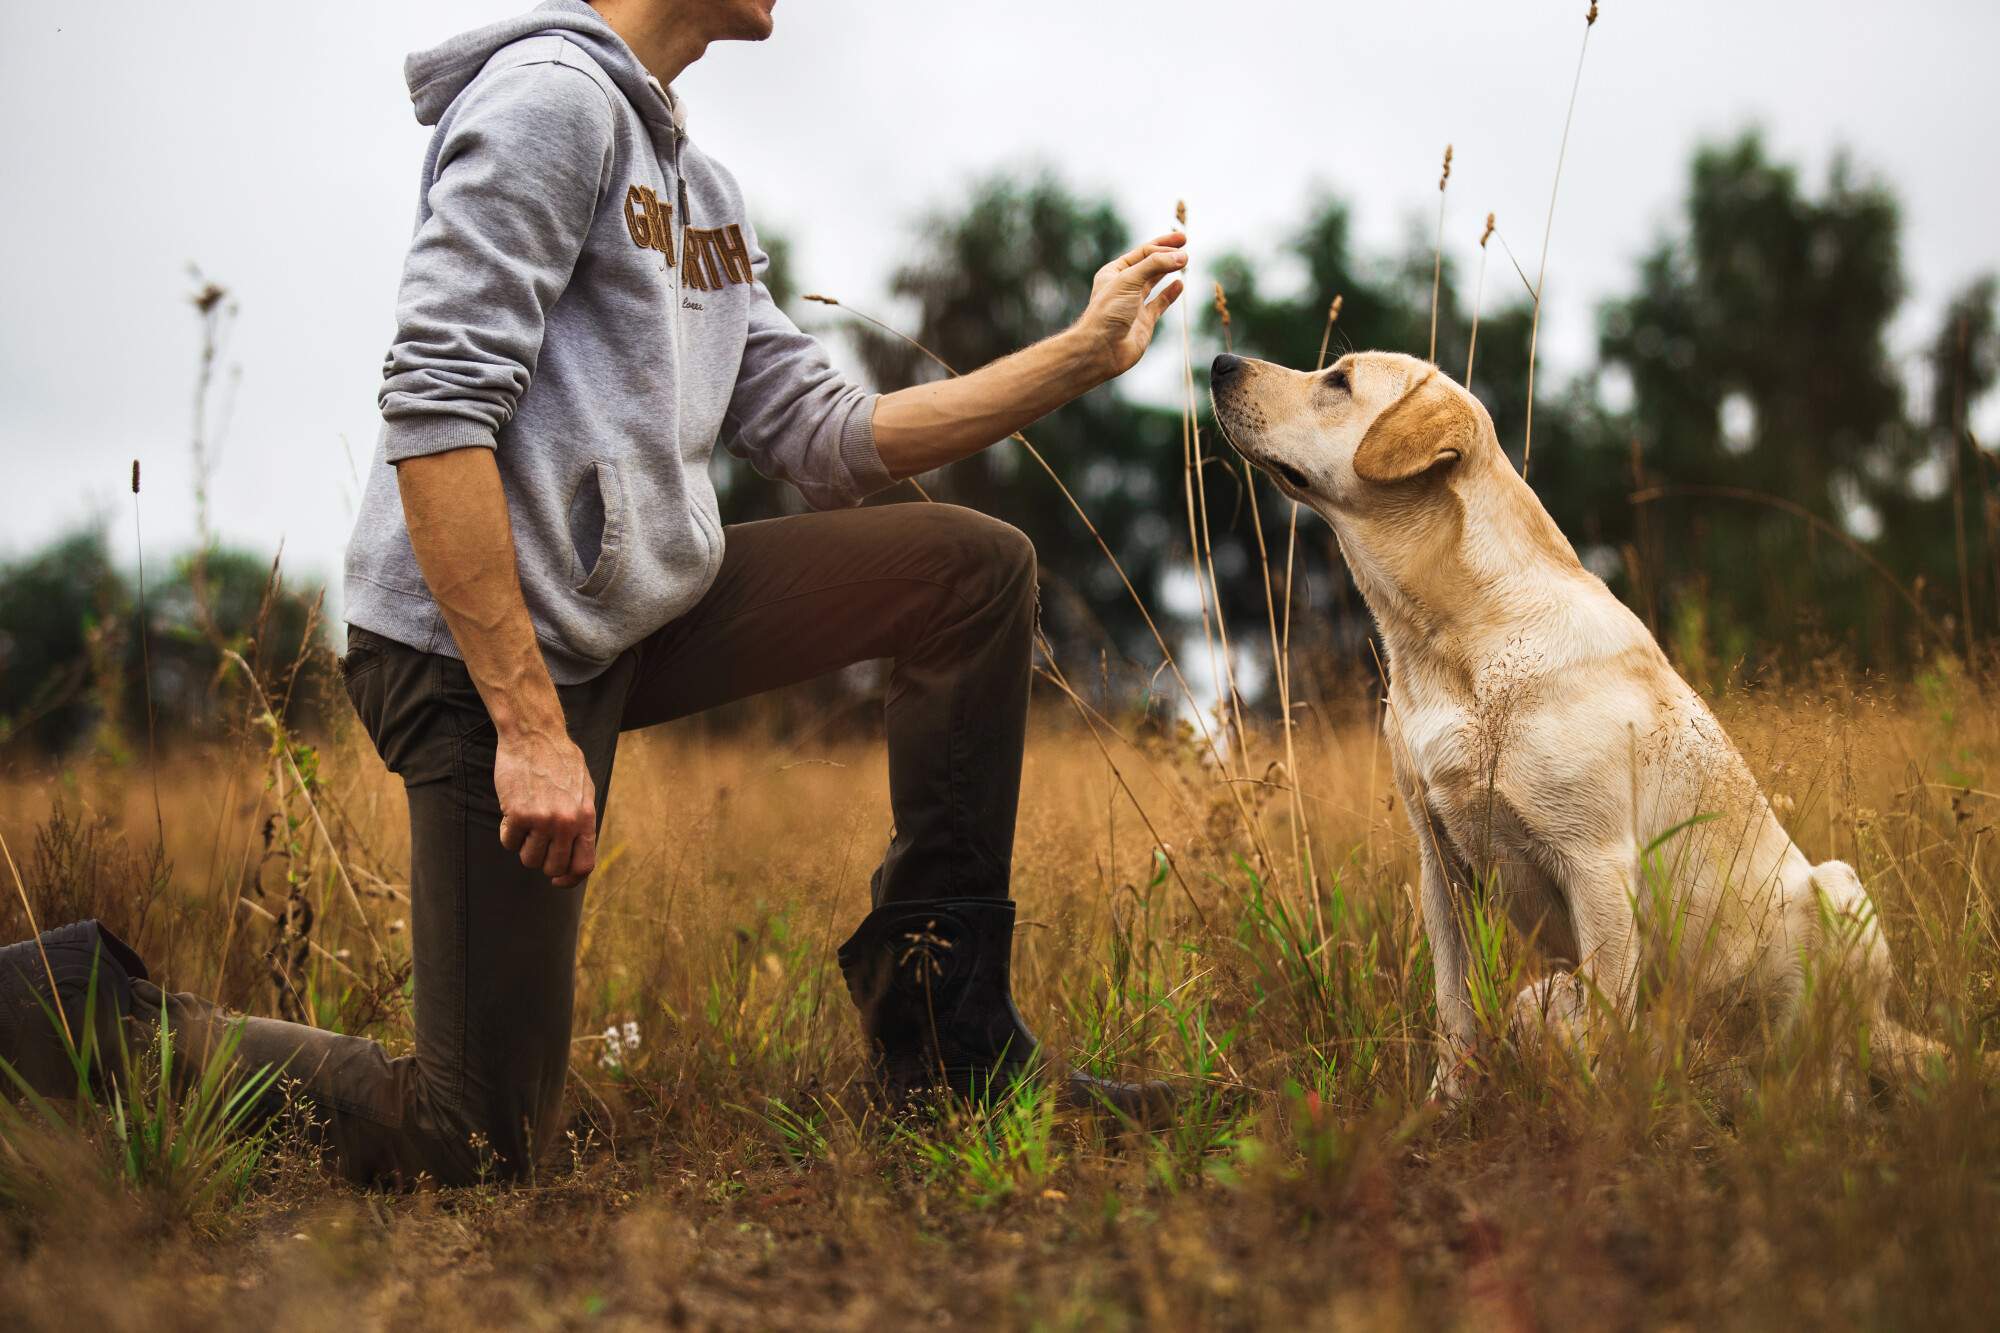 How to Choose a Trainer for Your Pup